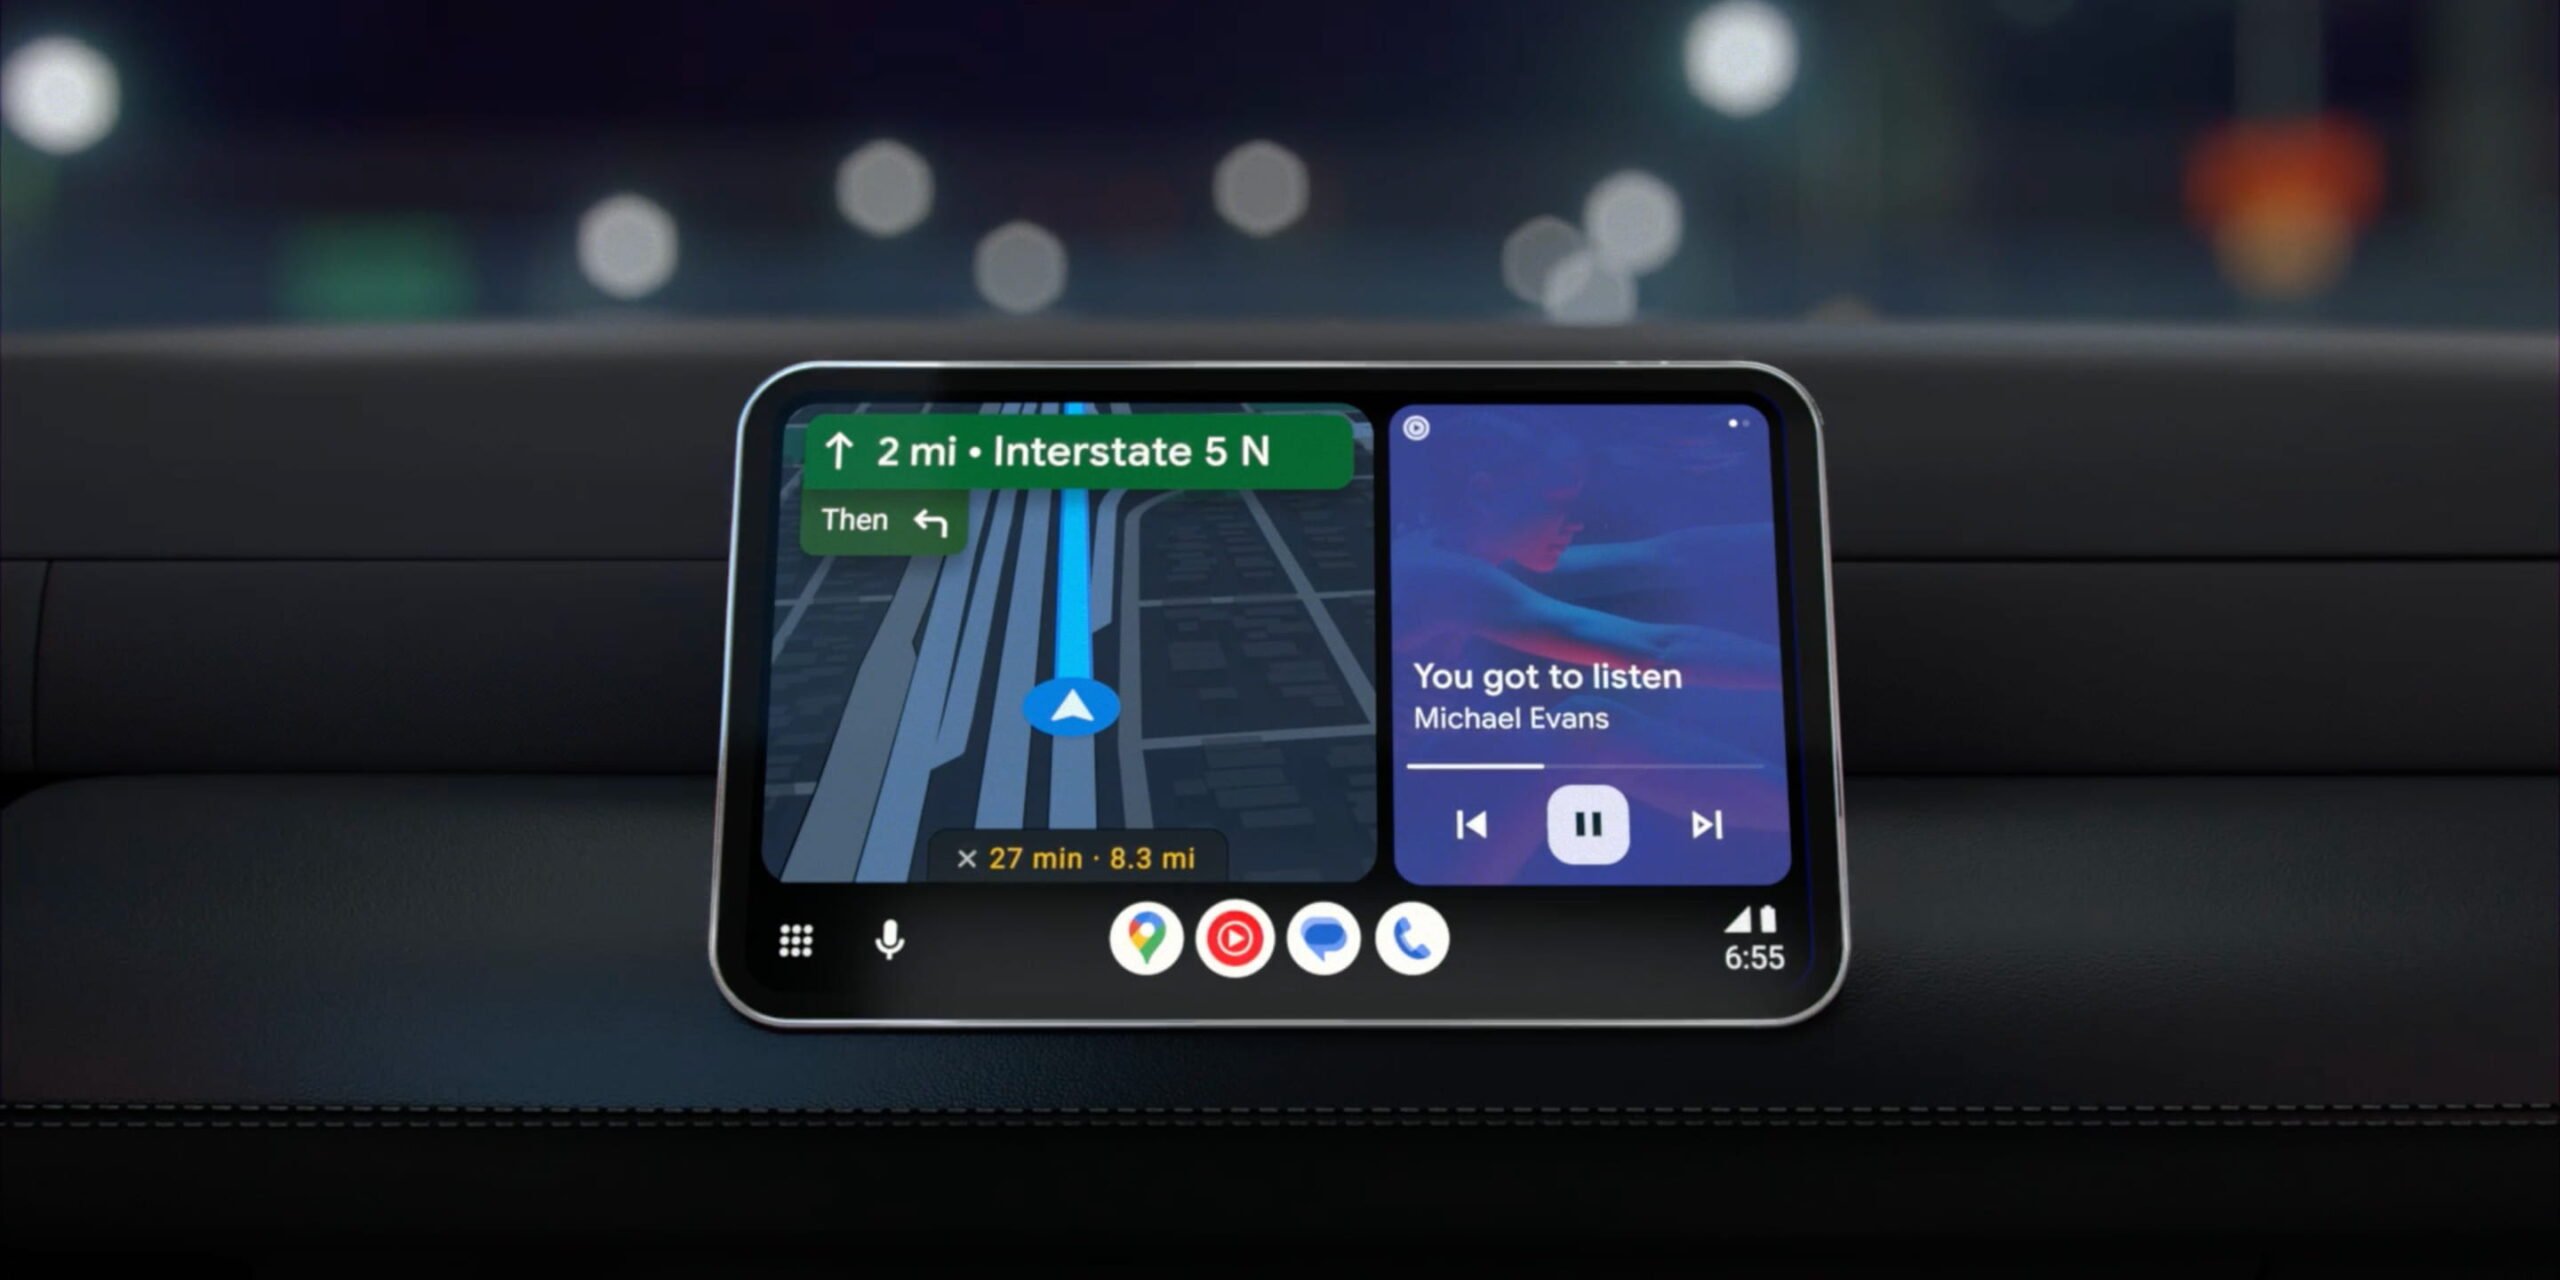 Users have started receiving the updated version of Android Auto